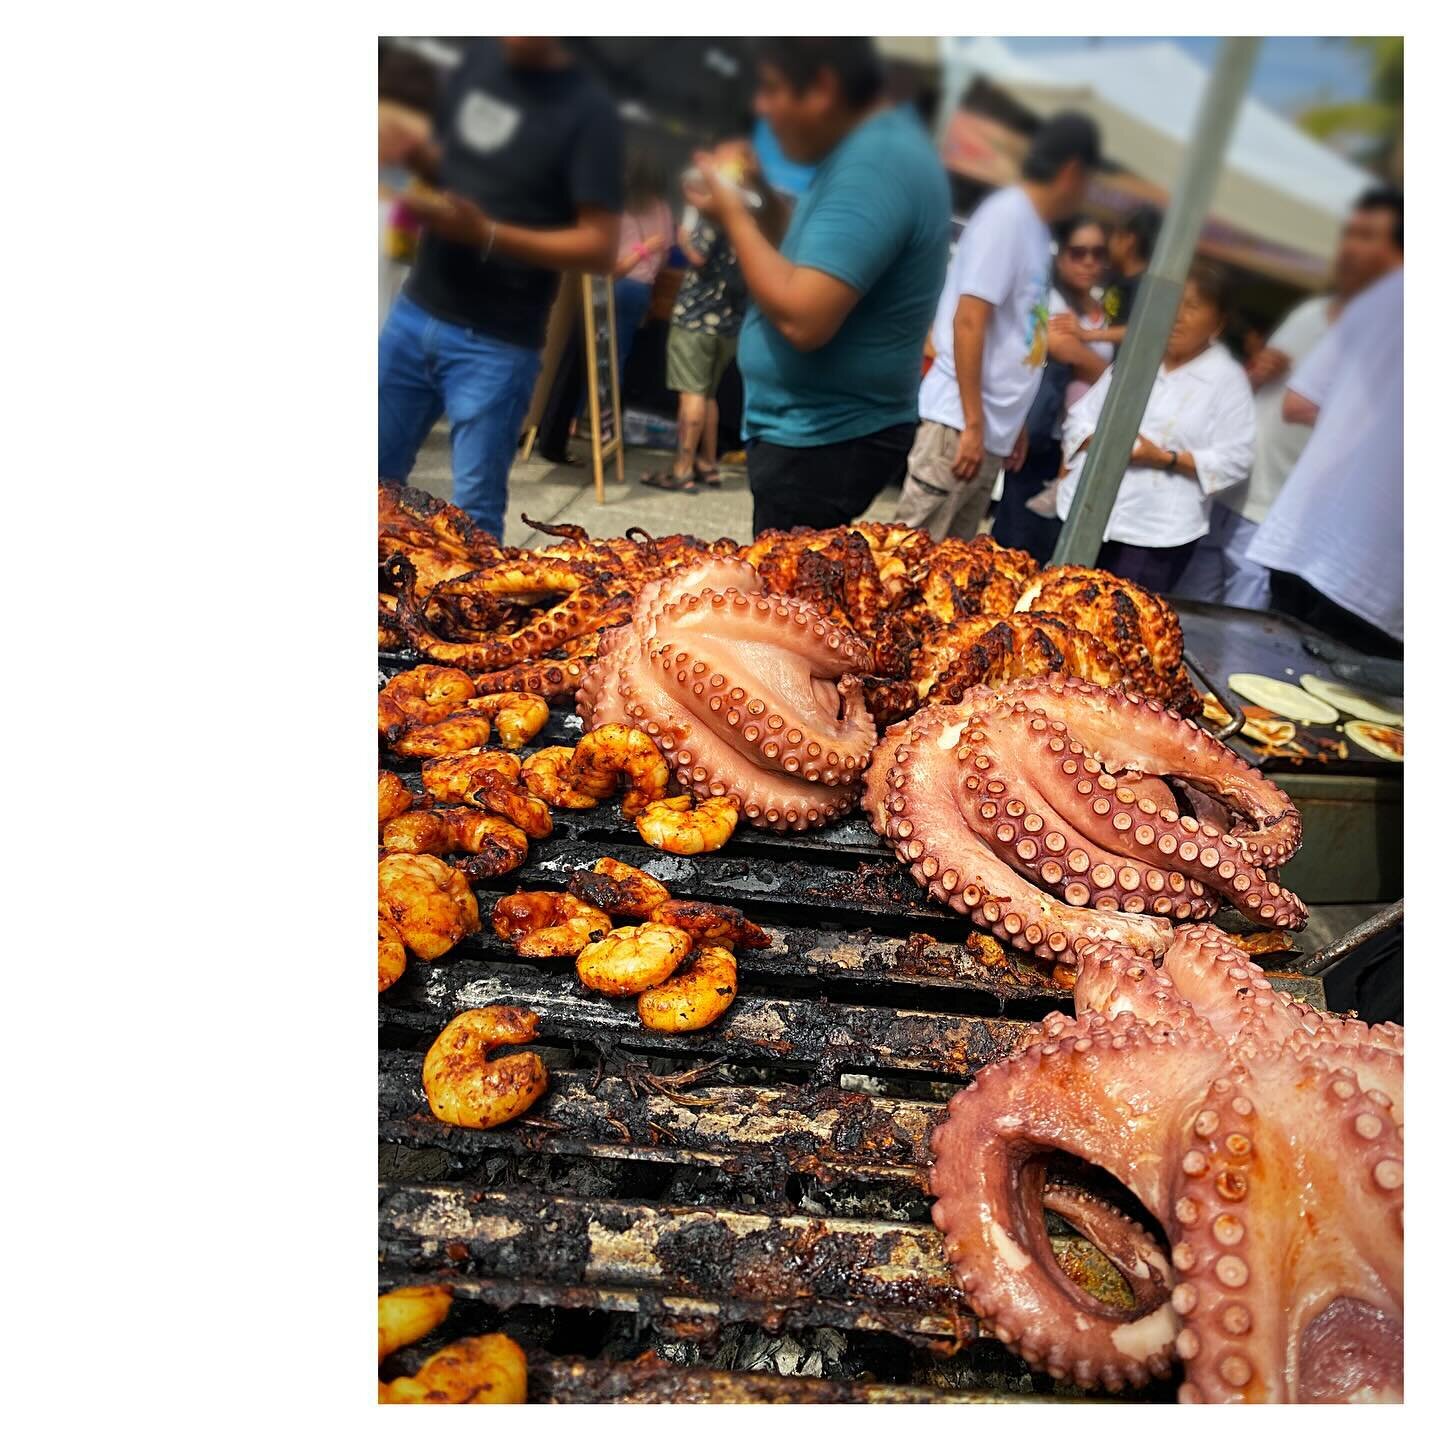 Sun was blazing with Easter Day in full bloom. Streets were blocked for thousands to parade. But I could only focus on the task at hand. Jamaica Mezcalitas were strong. Pulpo took the top prize. Churros were hot and crispy.